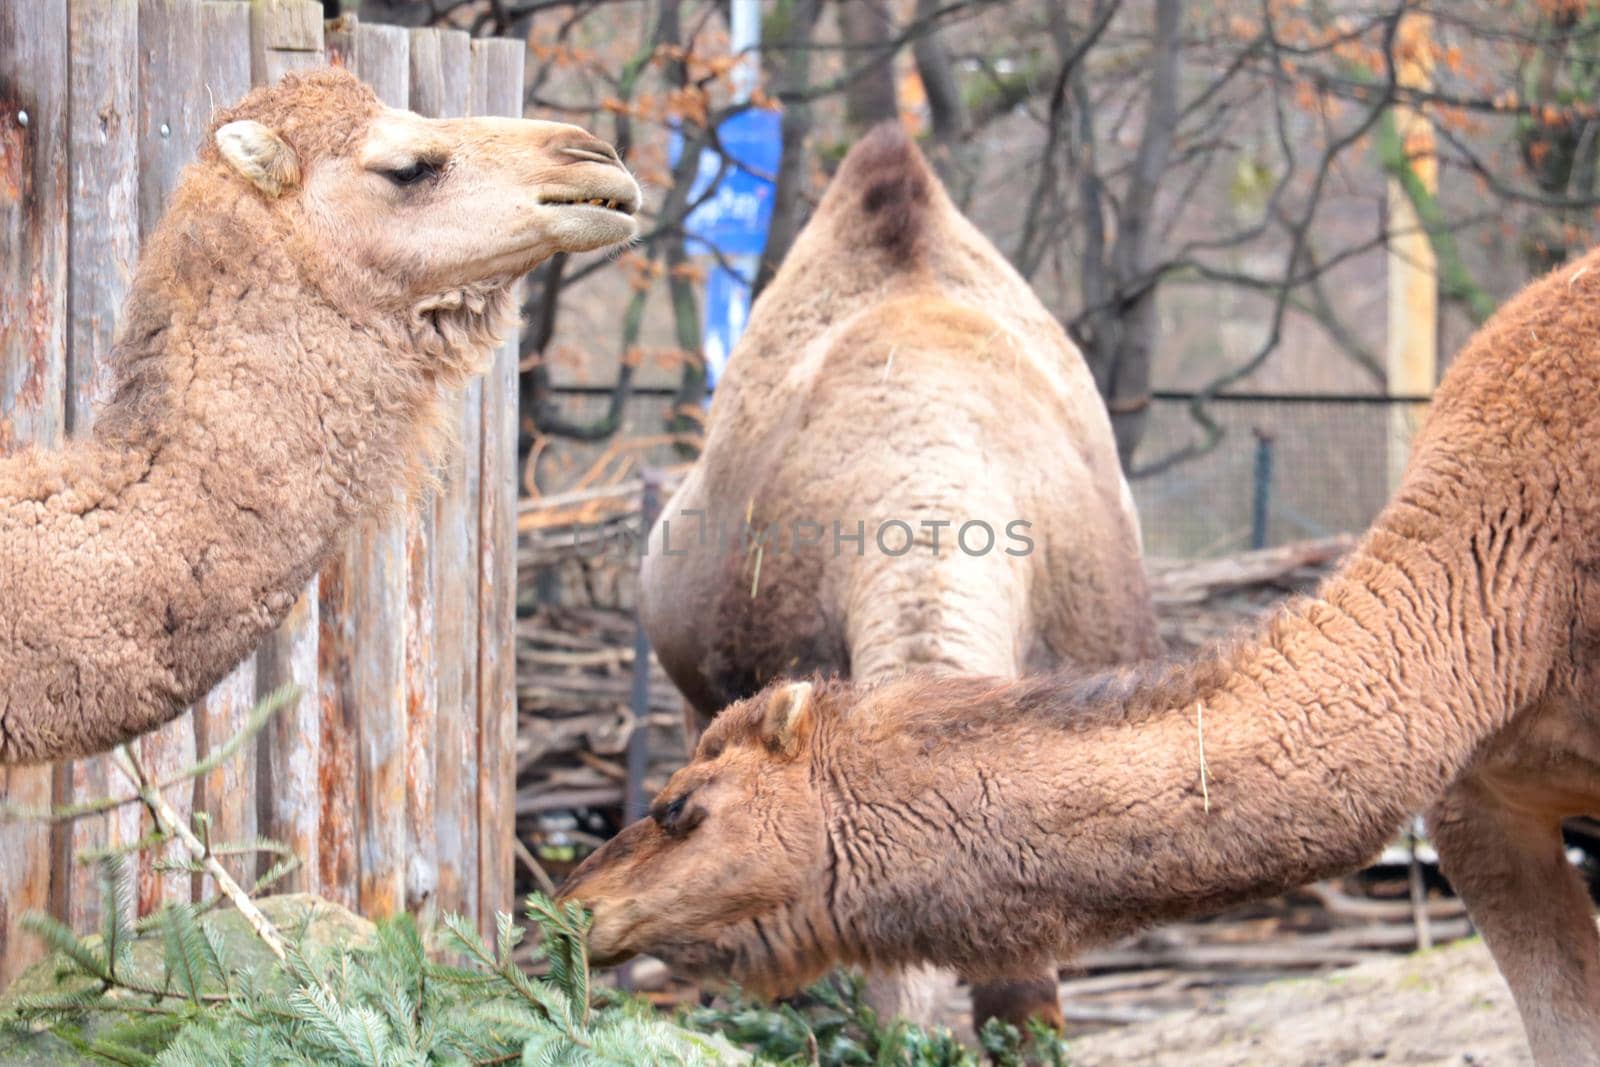 Camels in the park eat the green branches of trees